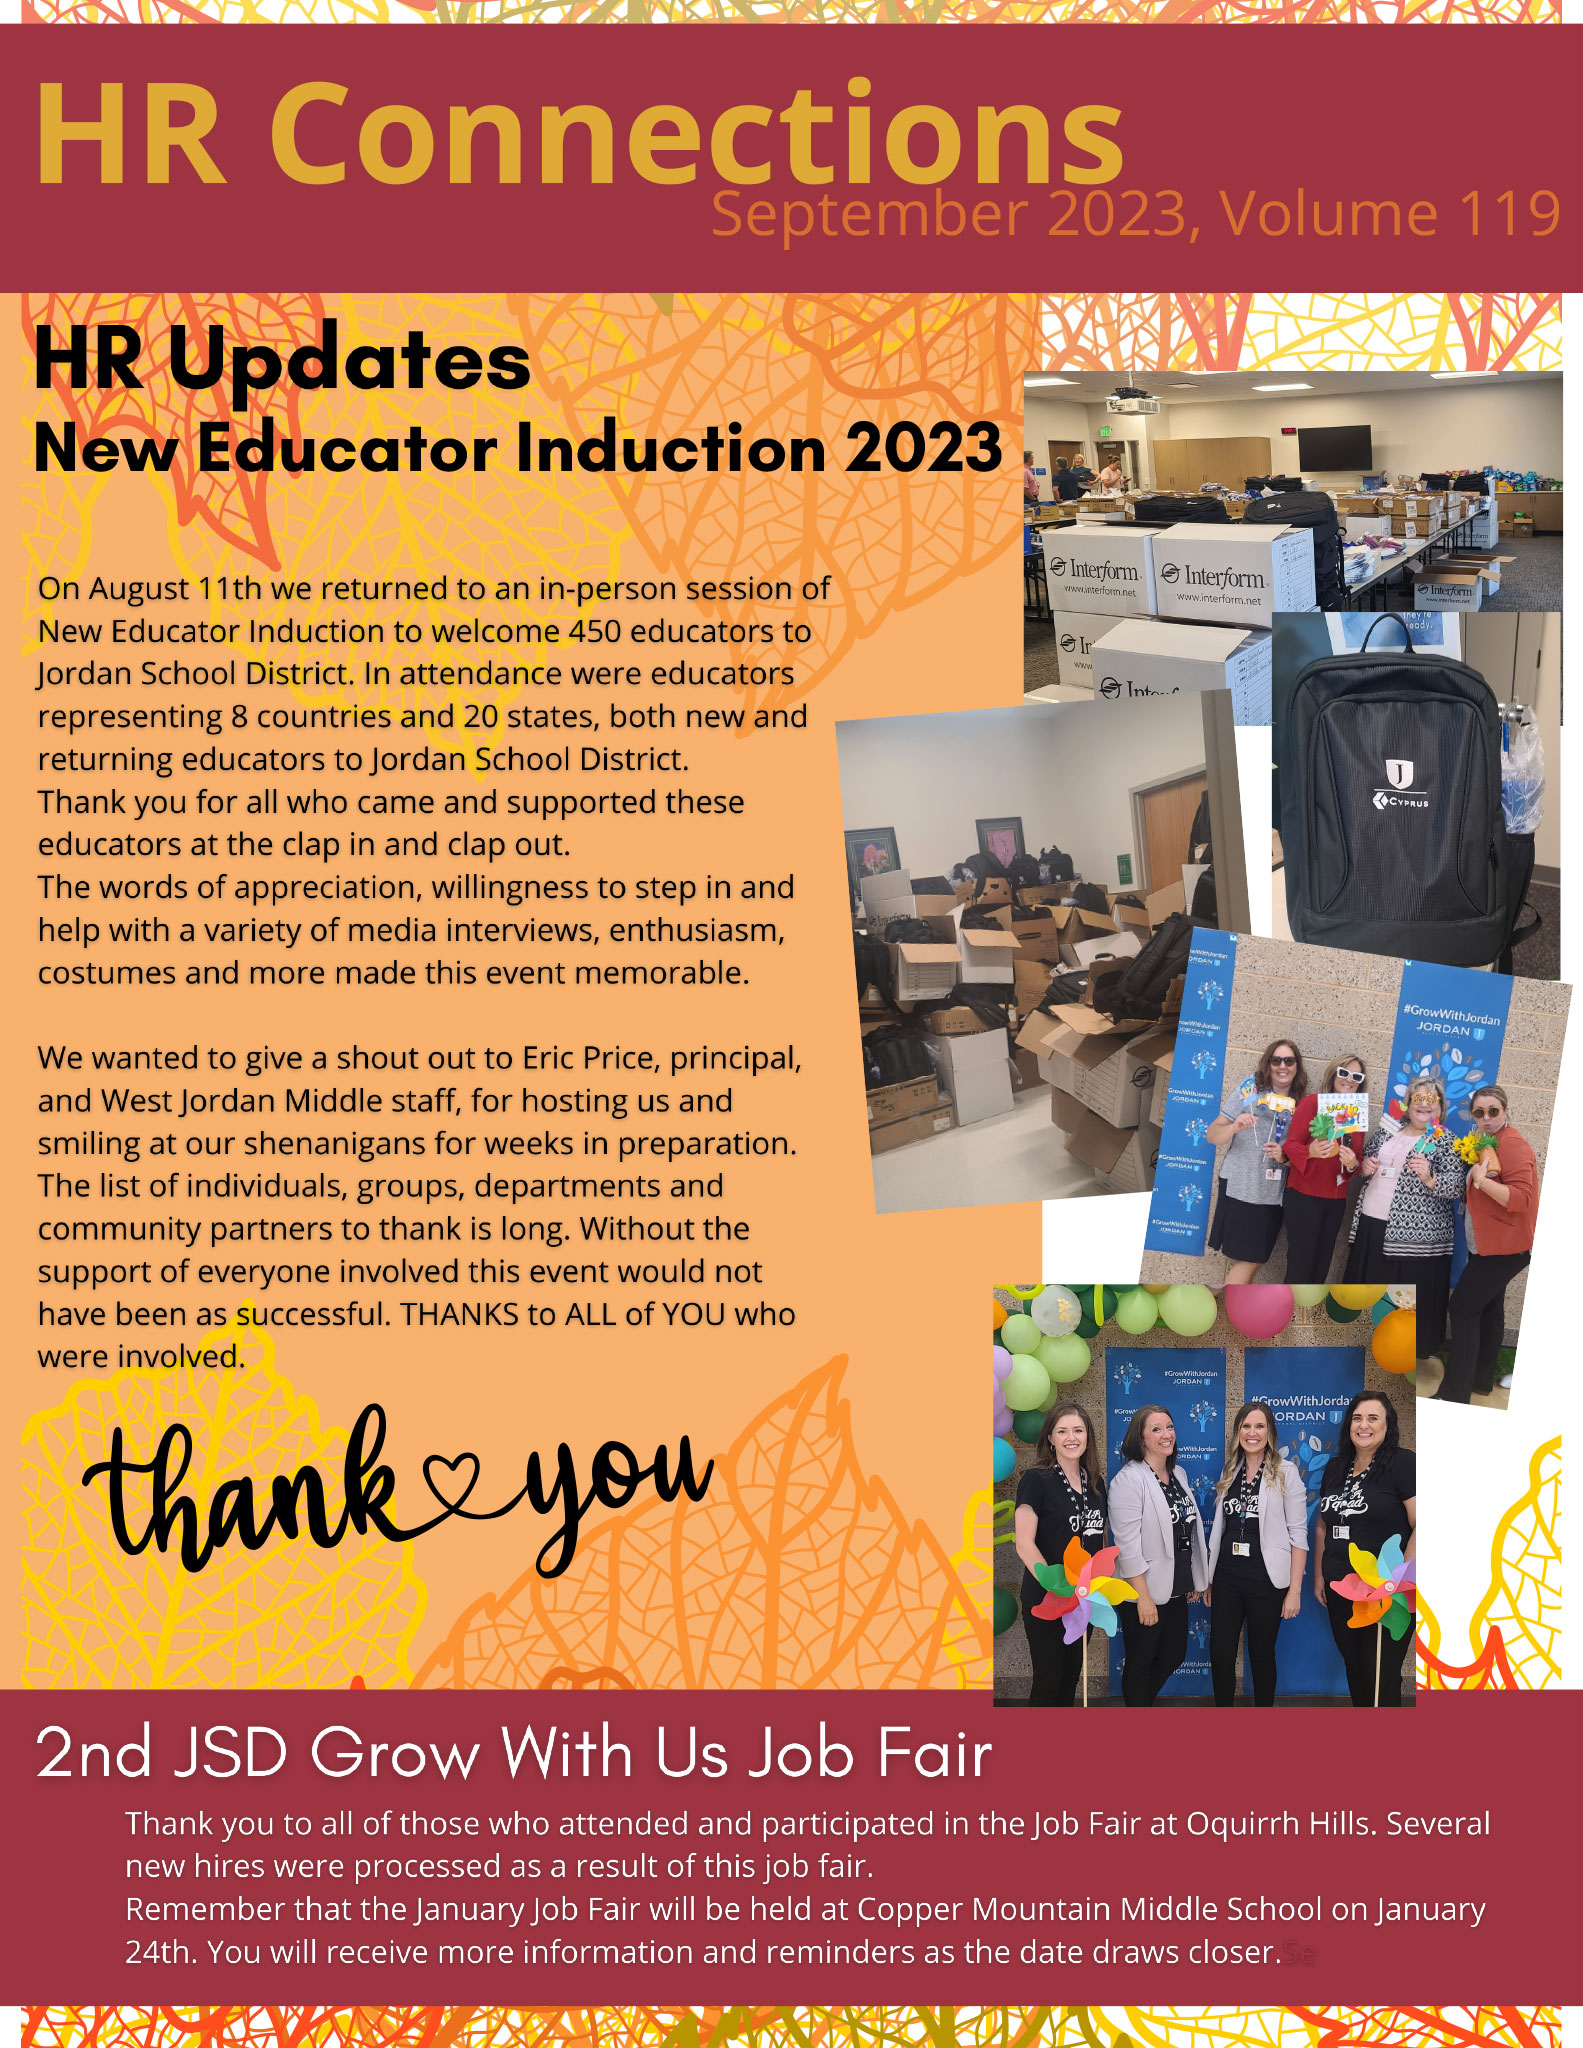 Sept. 2023 HR Connections Newsletter